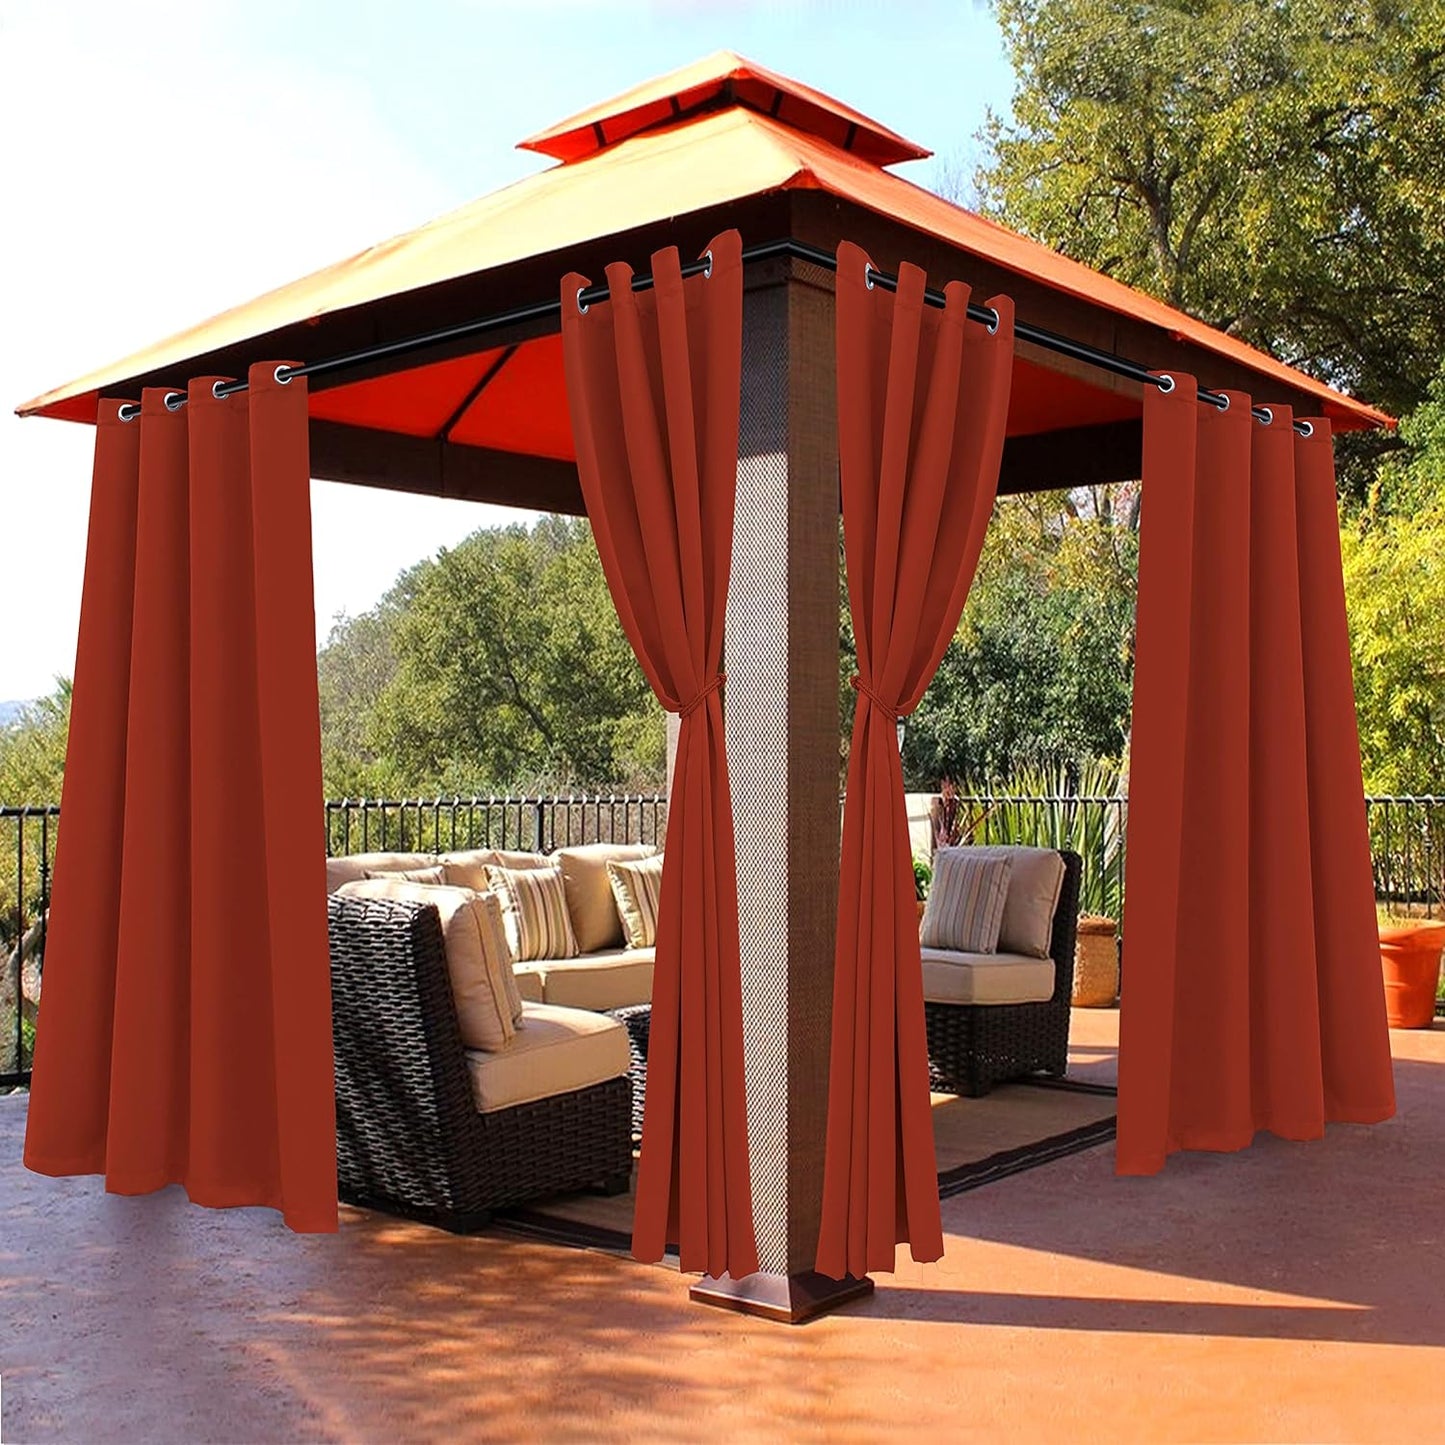 BONZER Outdoor Curtains for Patio Waterproof - Light Blocking Weather Resistant Privacy Grommet Blackout Curtains for Gazebo, Porch, Pergola, Cabana, Deck, Sunroom, 1 Panel, 52W X 84L Inch, Silver  BONZER Orange 52W X 84 Inch 